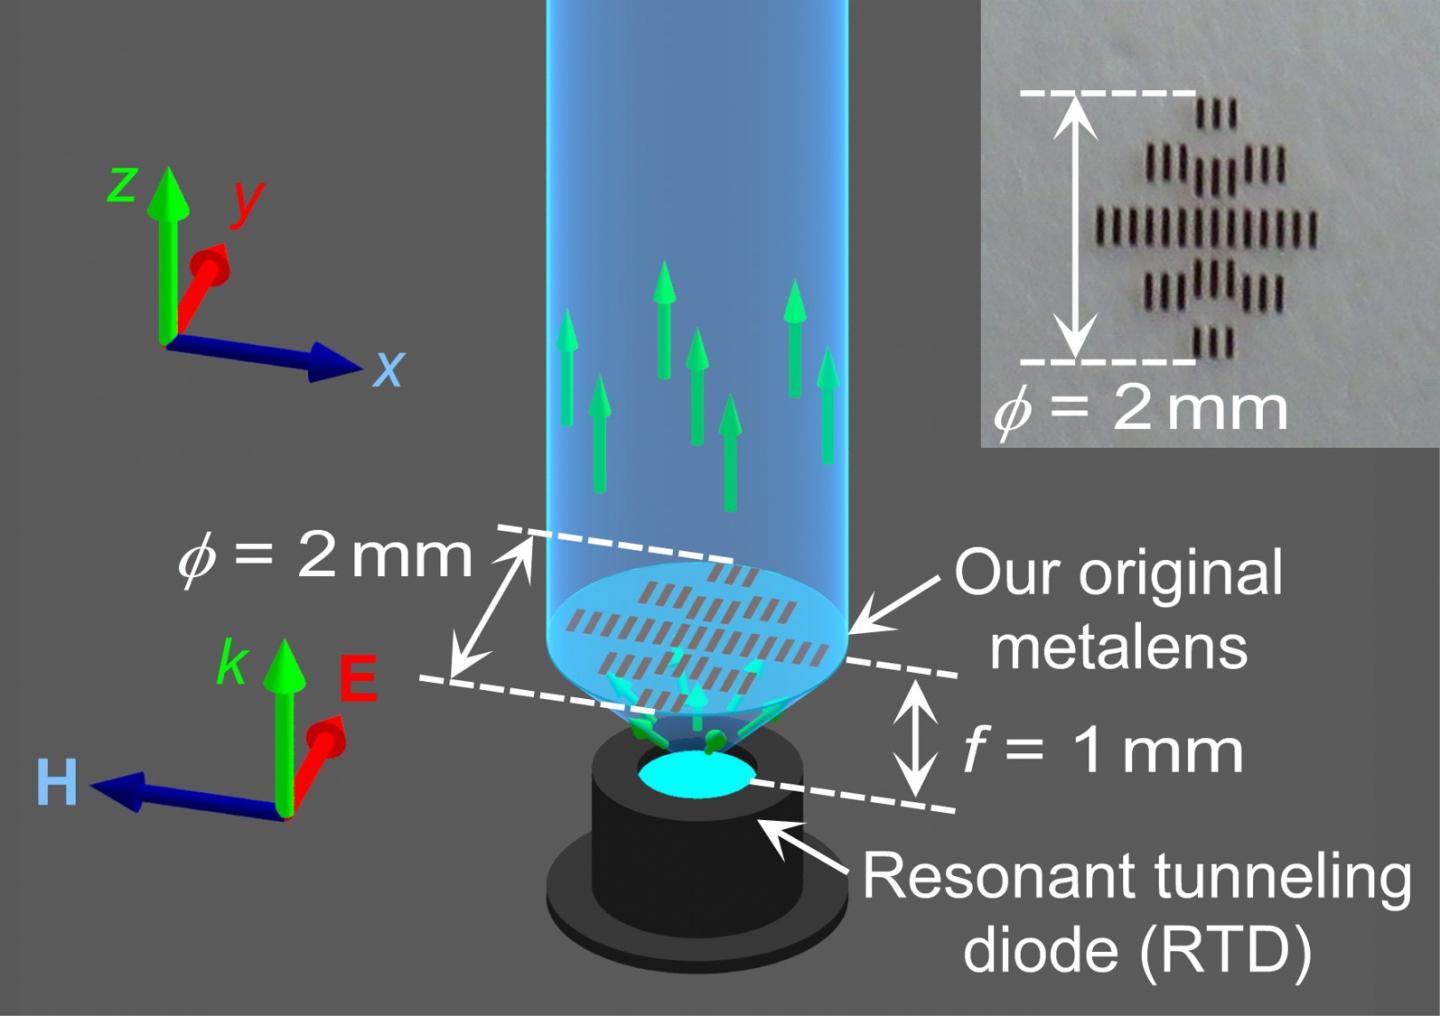 Ultra-short collimating metalens with a distance of only one millimeter.